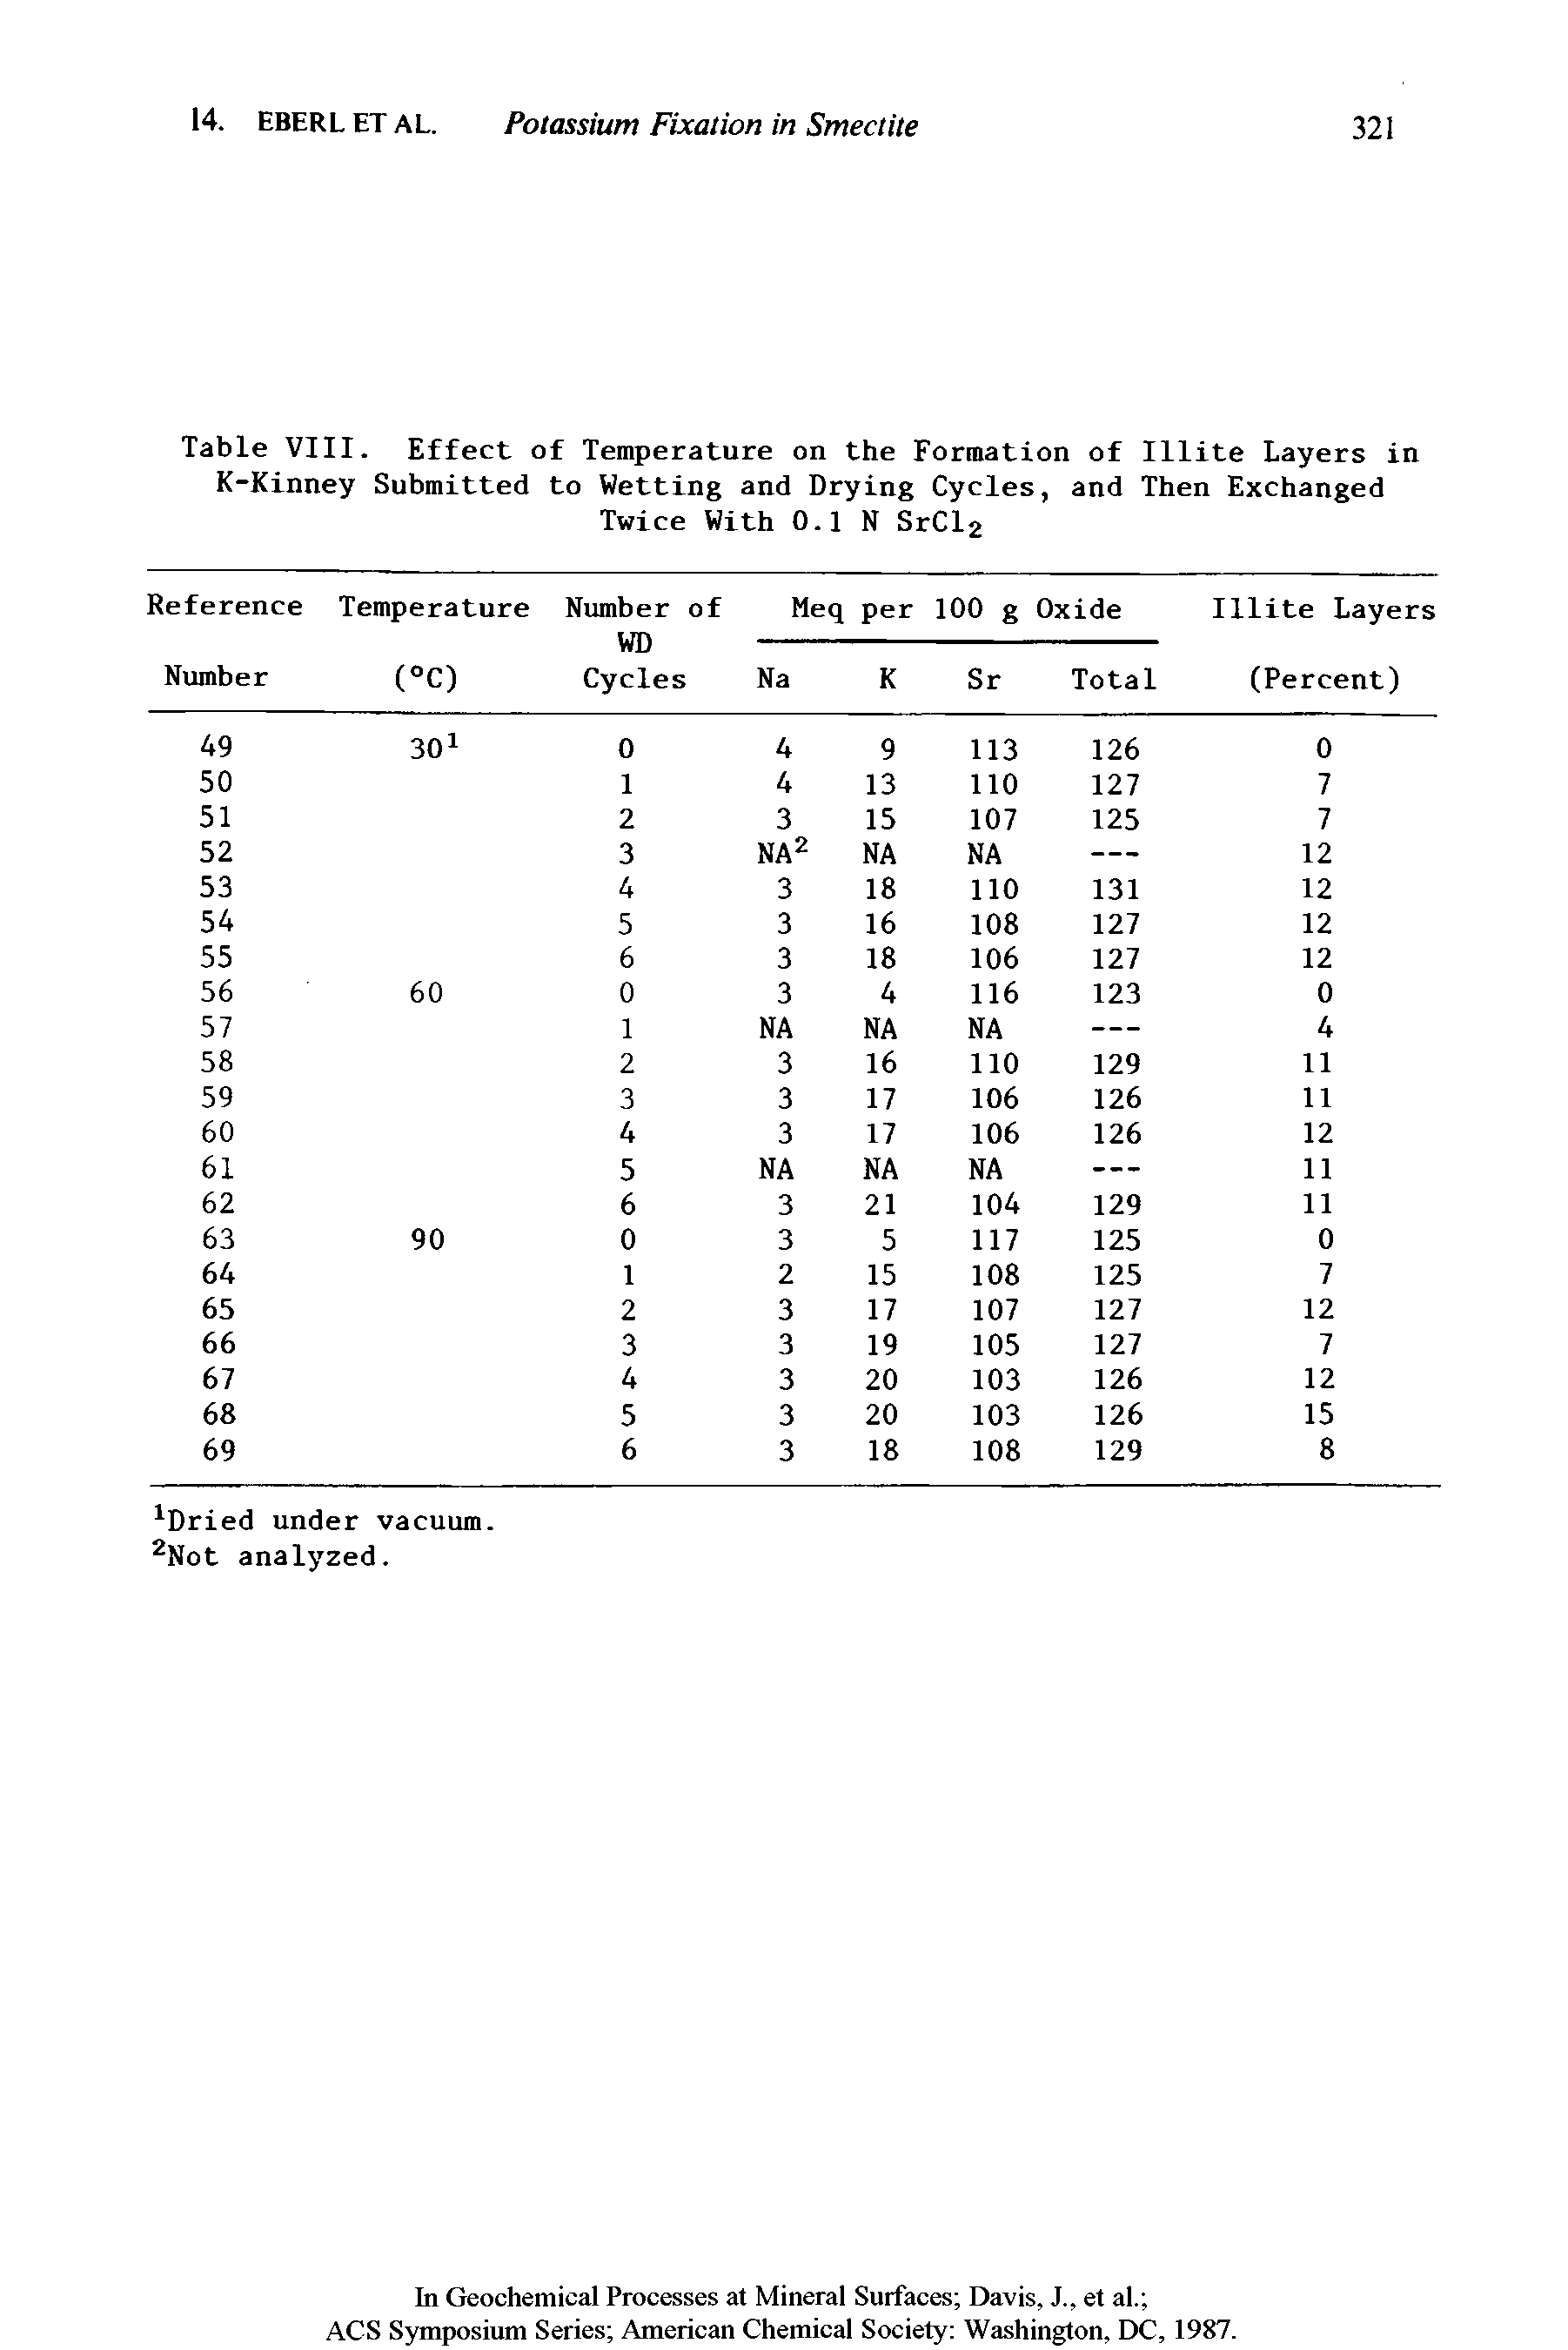 Table VIII. Effect of Temperature on the Formation of Illite Layers in K-Kinney Submitted to Wetting and Drying Cycles, and Then Exchanged Twice With 0.1 N SrCl2...